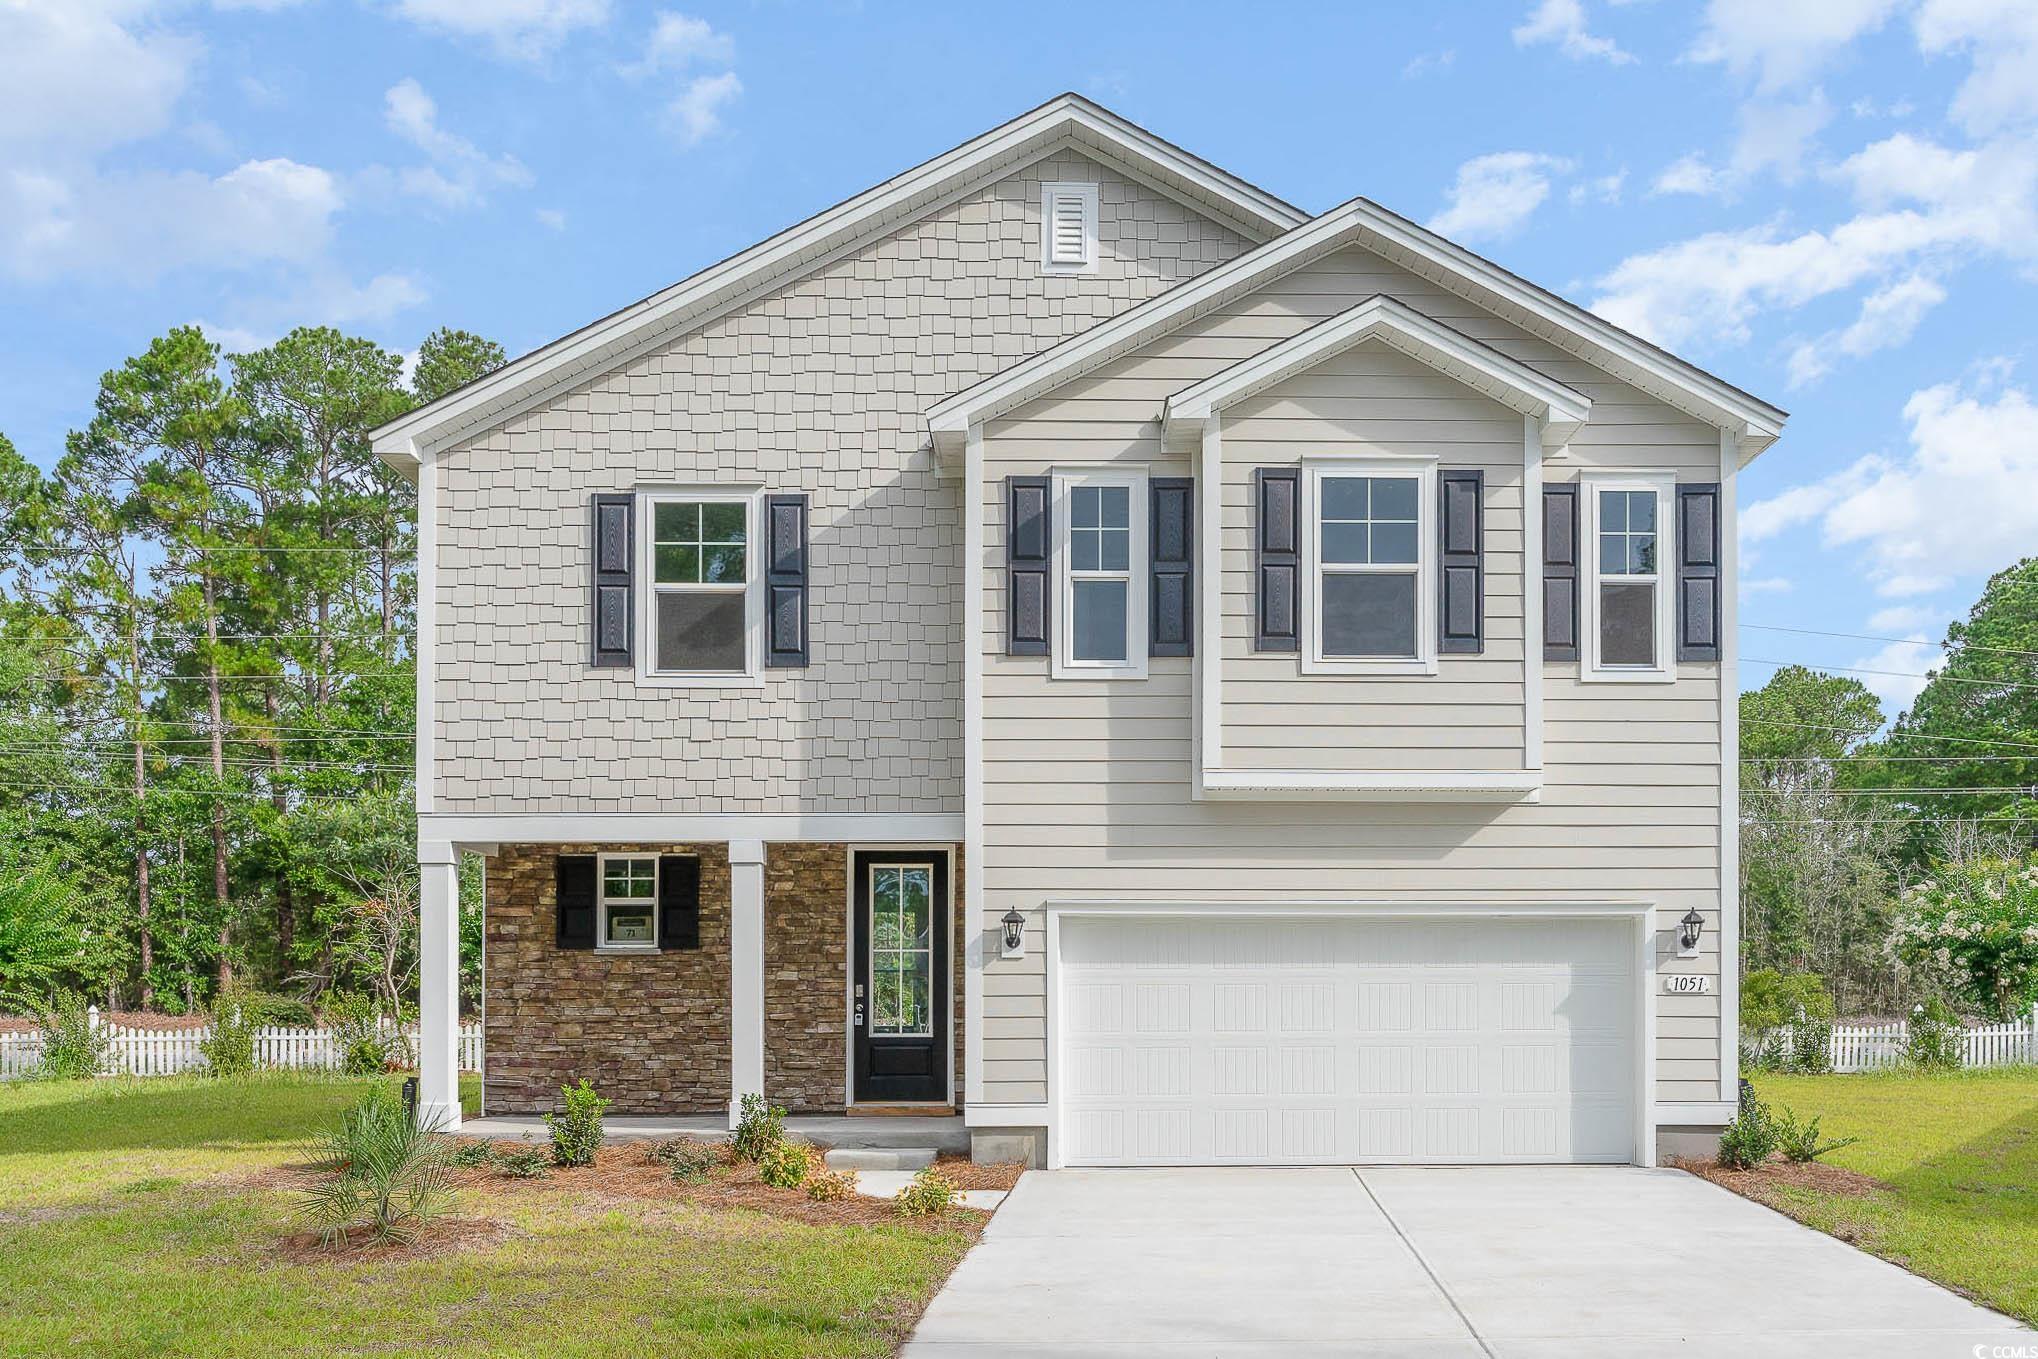 waterbridge community is in the sought-after carolina forest area. minutes from grocery stores, shopping centers, golf courses, attractions and the beach! the community is filled with resort-style amenities that make it hard to leave home. this gated community features a clubhouse, the “largest residential swimming pool in sc”, fitness center, tennis, pickleball, basketball, volleyball, and bocce ball, a lake and boat launch! this spacious two level home has everything you are looking for! with a large, open concept great room and kitchen, you will have plenty of room to entertain. the kitchen is the heart of the home with quartz countertops, large island with breakfast bar, stainless whirlpool appliances including a gas range, and a spacious walk-in pantry. this home features a great size loft and laundry room on the second floor for convenience. the primary bedroom suite has a huge walk-in closet and very spacious private bath with double sinks, 5' tiled shower, and linen closet. this is america's smart home! each of our homes comes with an industry leading smart home technology package that will allow you to control the thermostat, front door light and lock, and video doorbell from your smartphone or with voice commands to alexa. *photos are of a similar glynn home.  (home and community information, including pricing, included features, terms, availability and amenities, are subject to change prior to sale at any time without notice or obligation. square footages are approximate. pictures, photographs, colors, features, and sizes are for illustration purposes only and will vary from the homes as built. equal housing opportunity builder.)